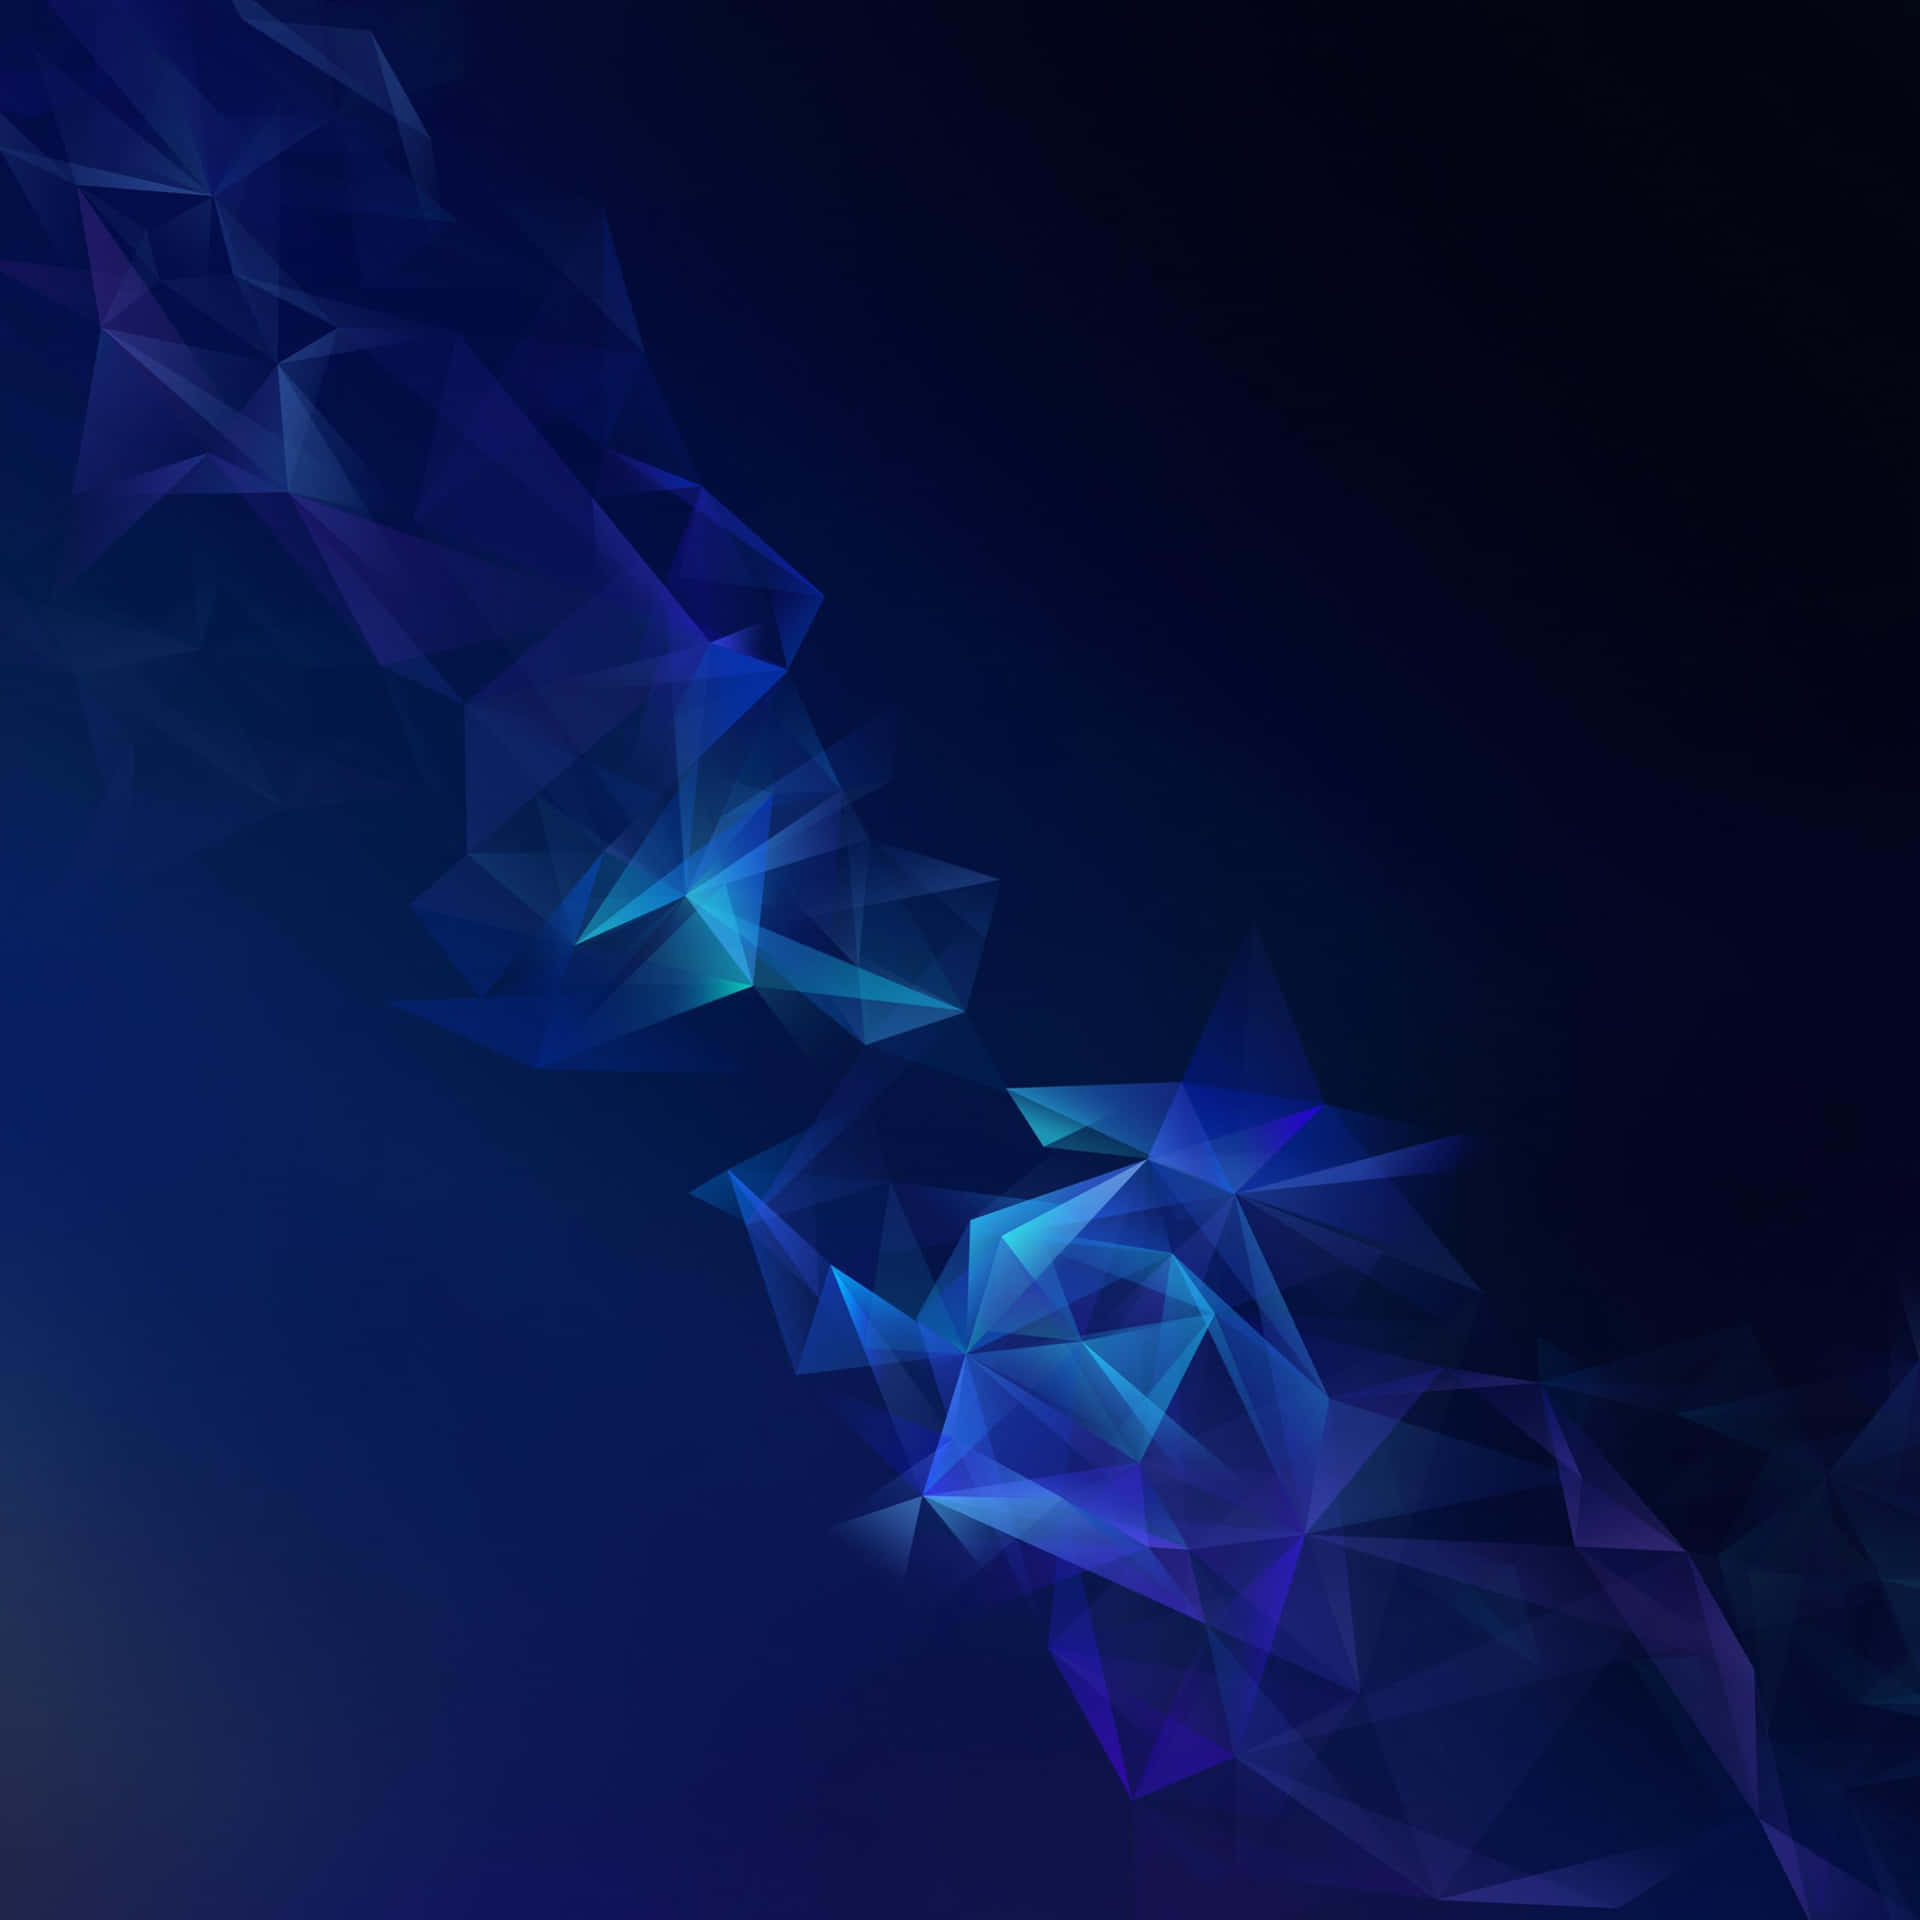 Samsung Dex With Blue Geometric Shapes Background